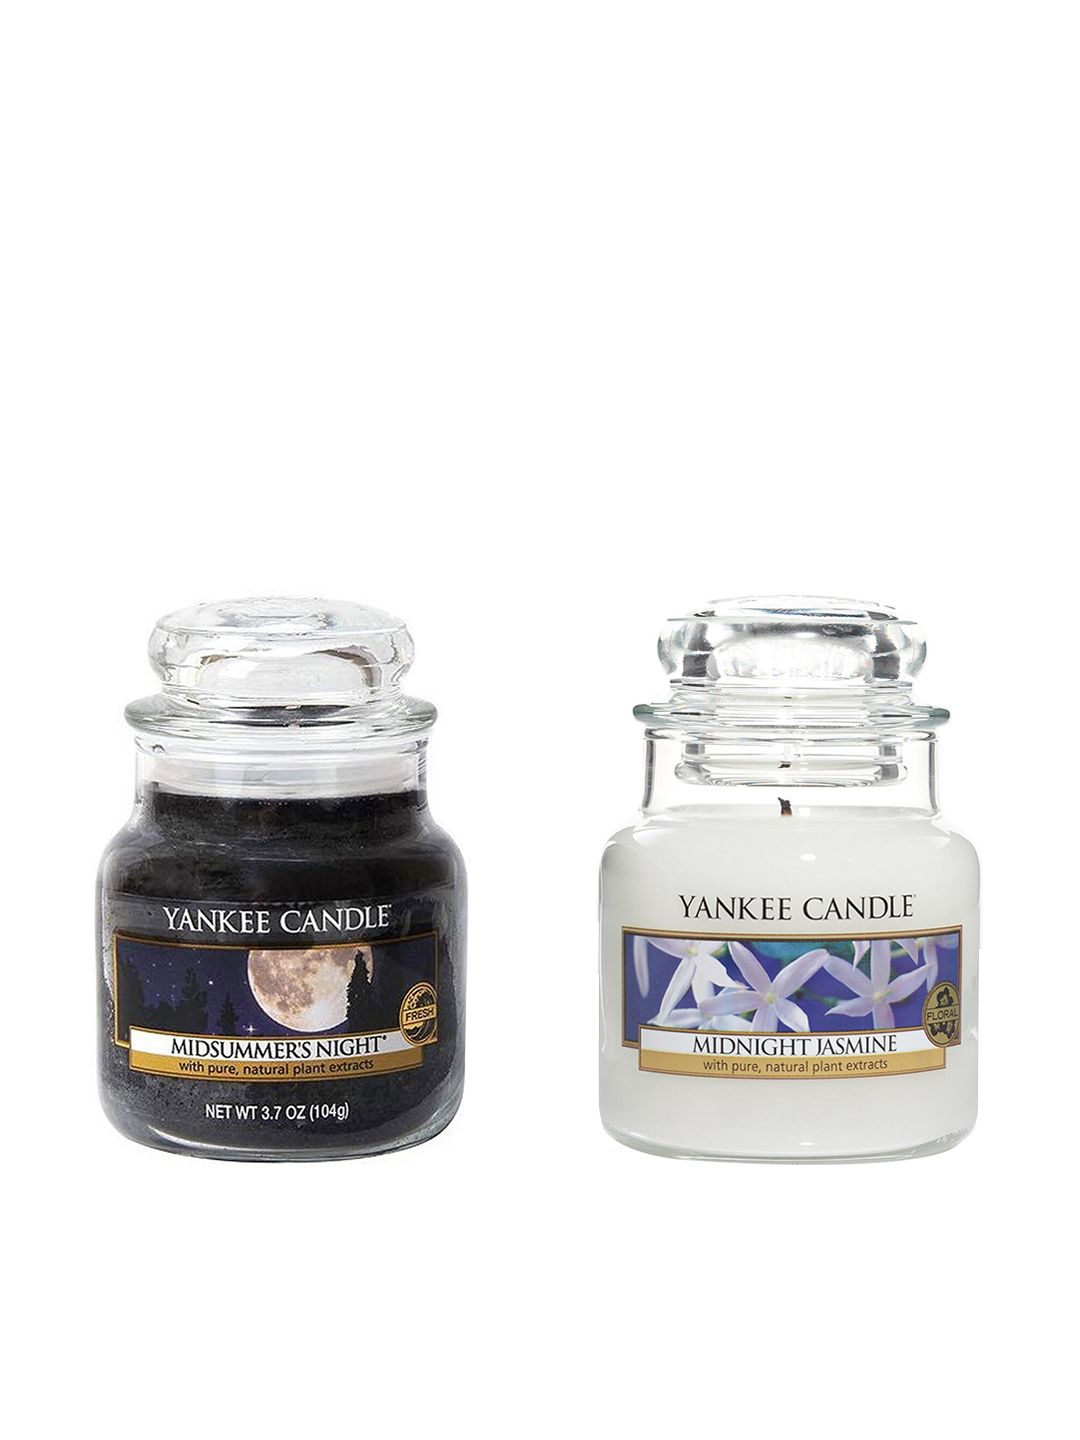 YANKEE CANDLE Set Of 2 Midnight Jasmine & Midsummer Night Scented Jar Candles Price in India